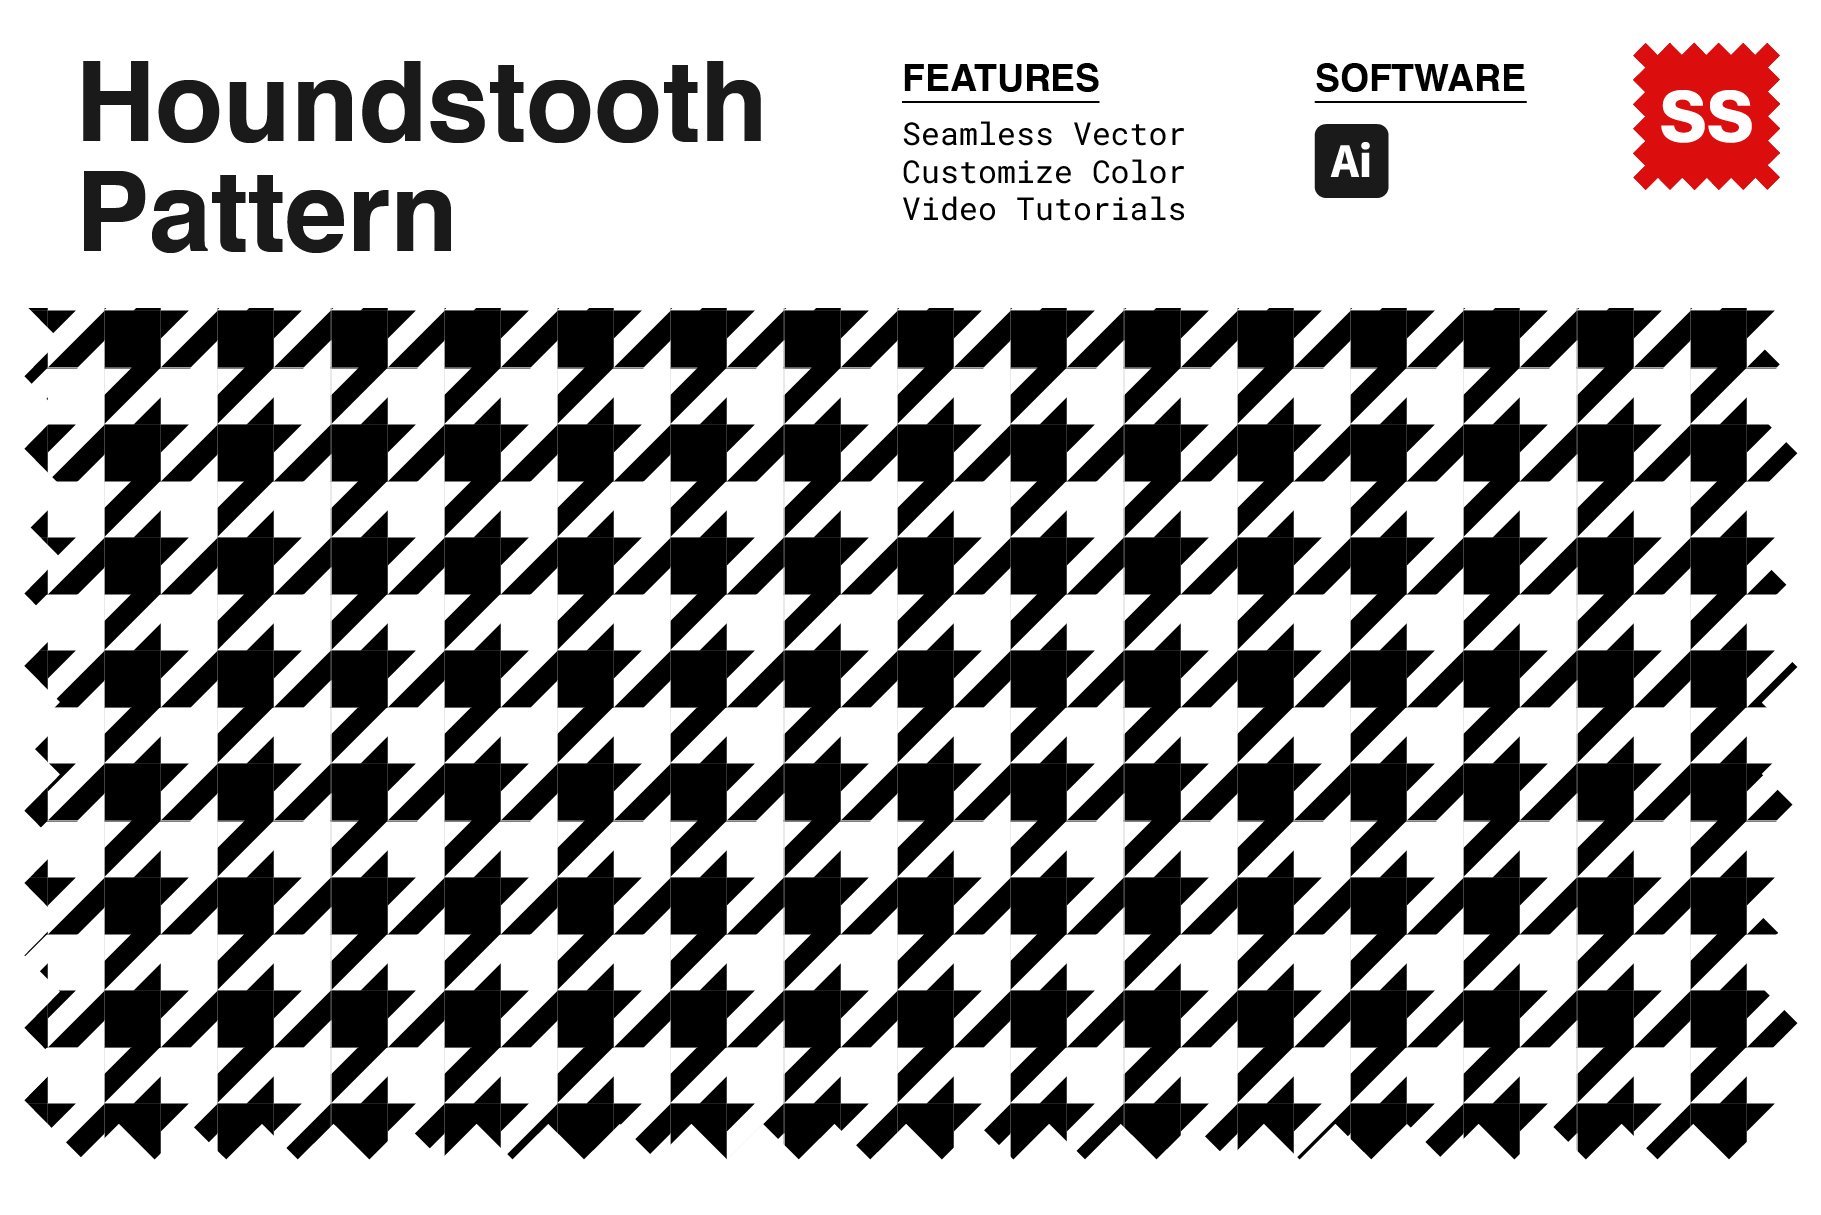 How To Make An Advanced Seamless Houndstooth Pattern Swatch In Adobe  Illustrator 